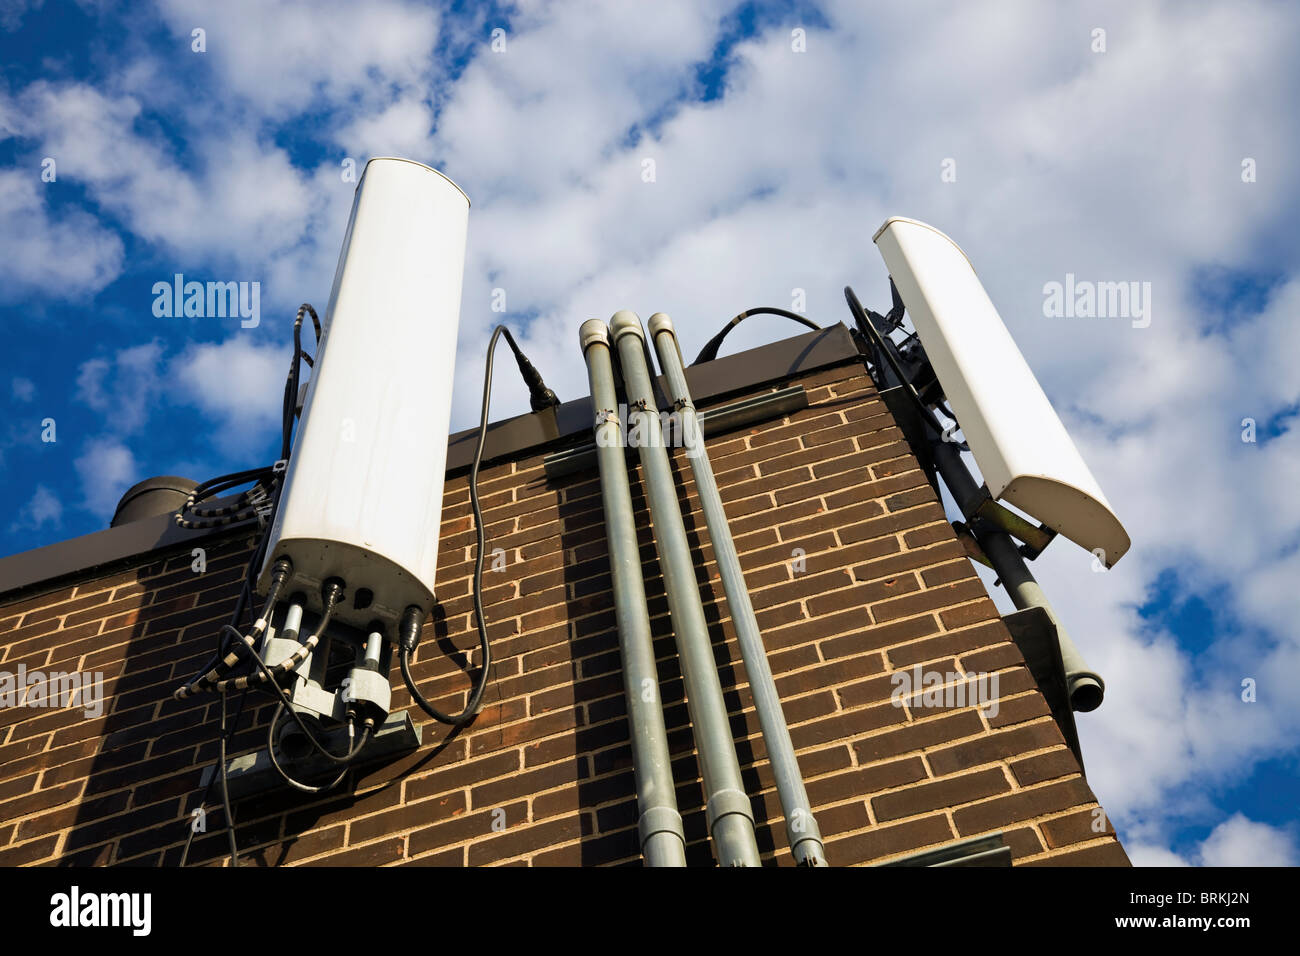 Cellular antennas installed on the top of the building Stock Photo